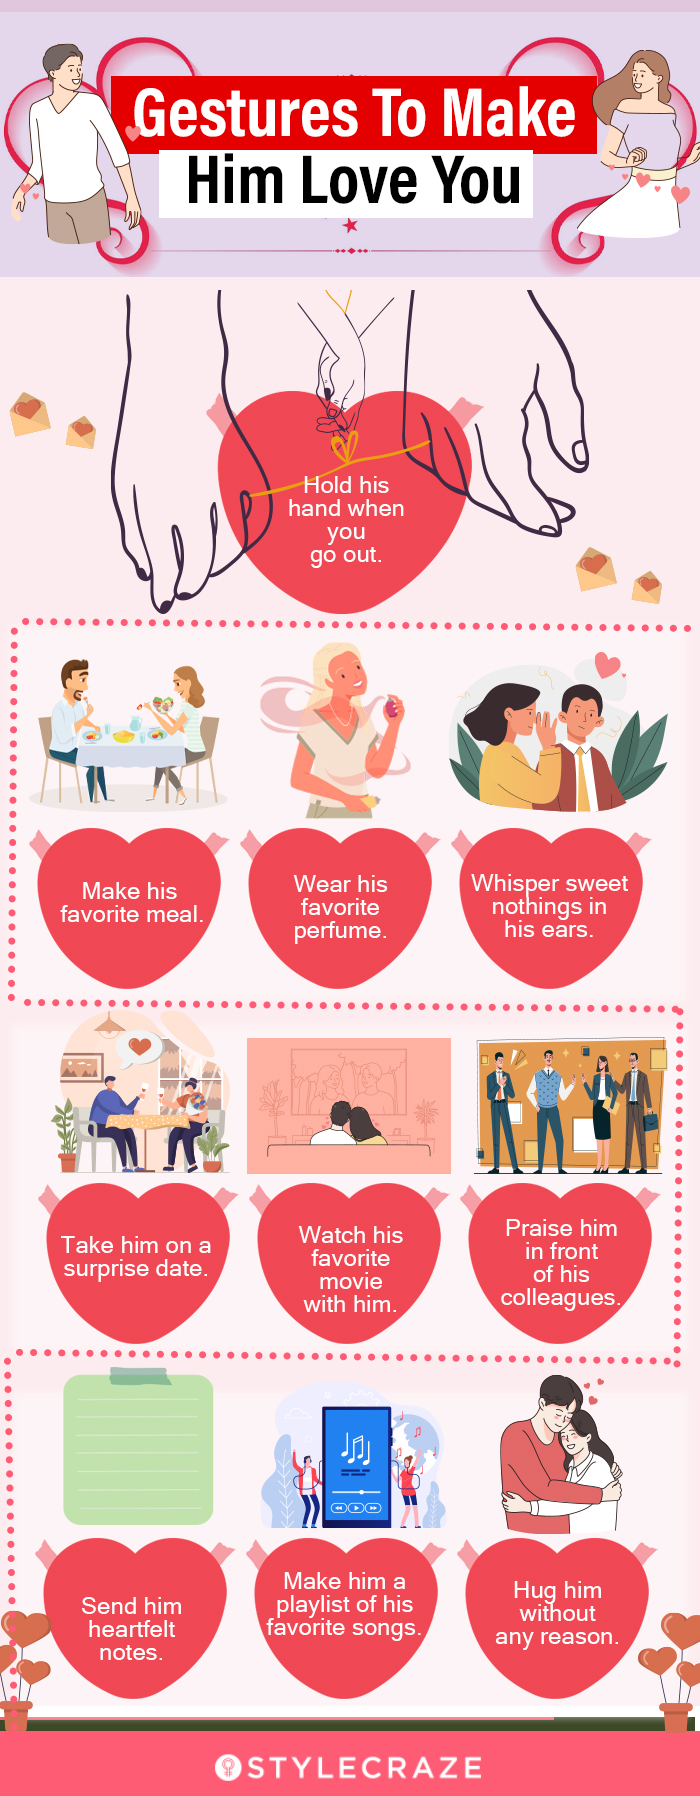 gestures to make him love you [infographic]